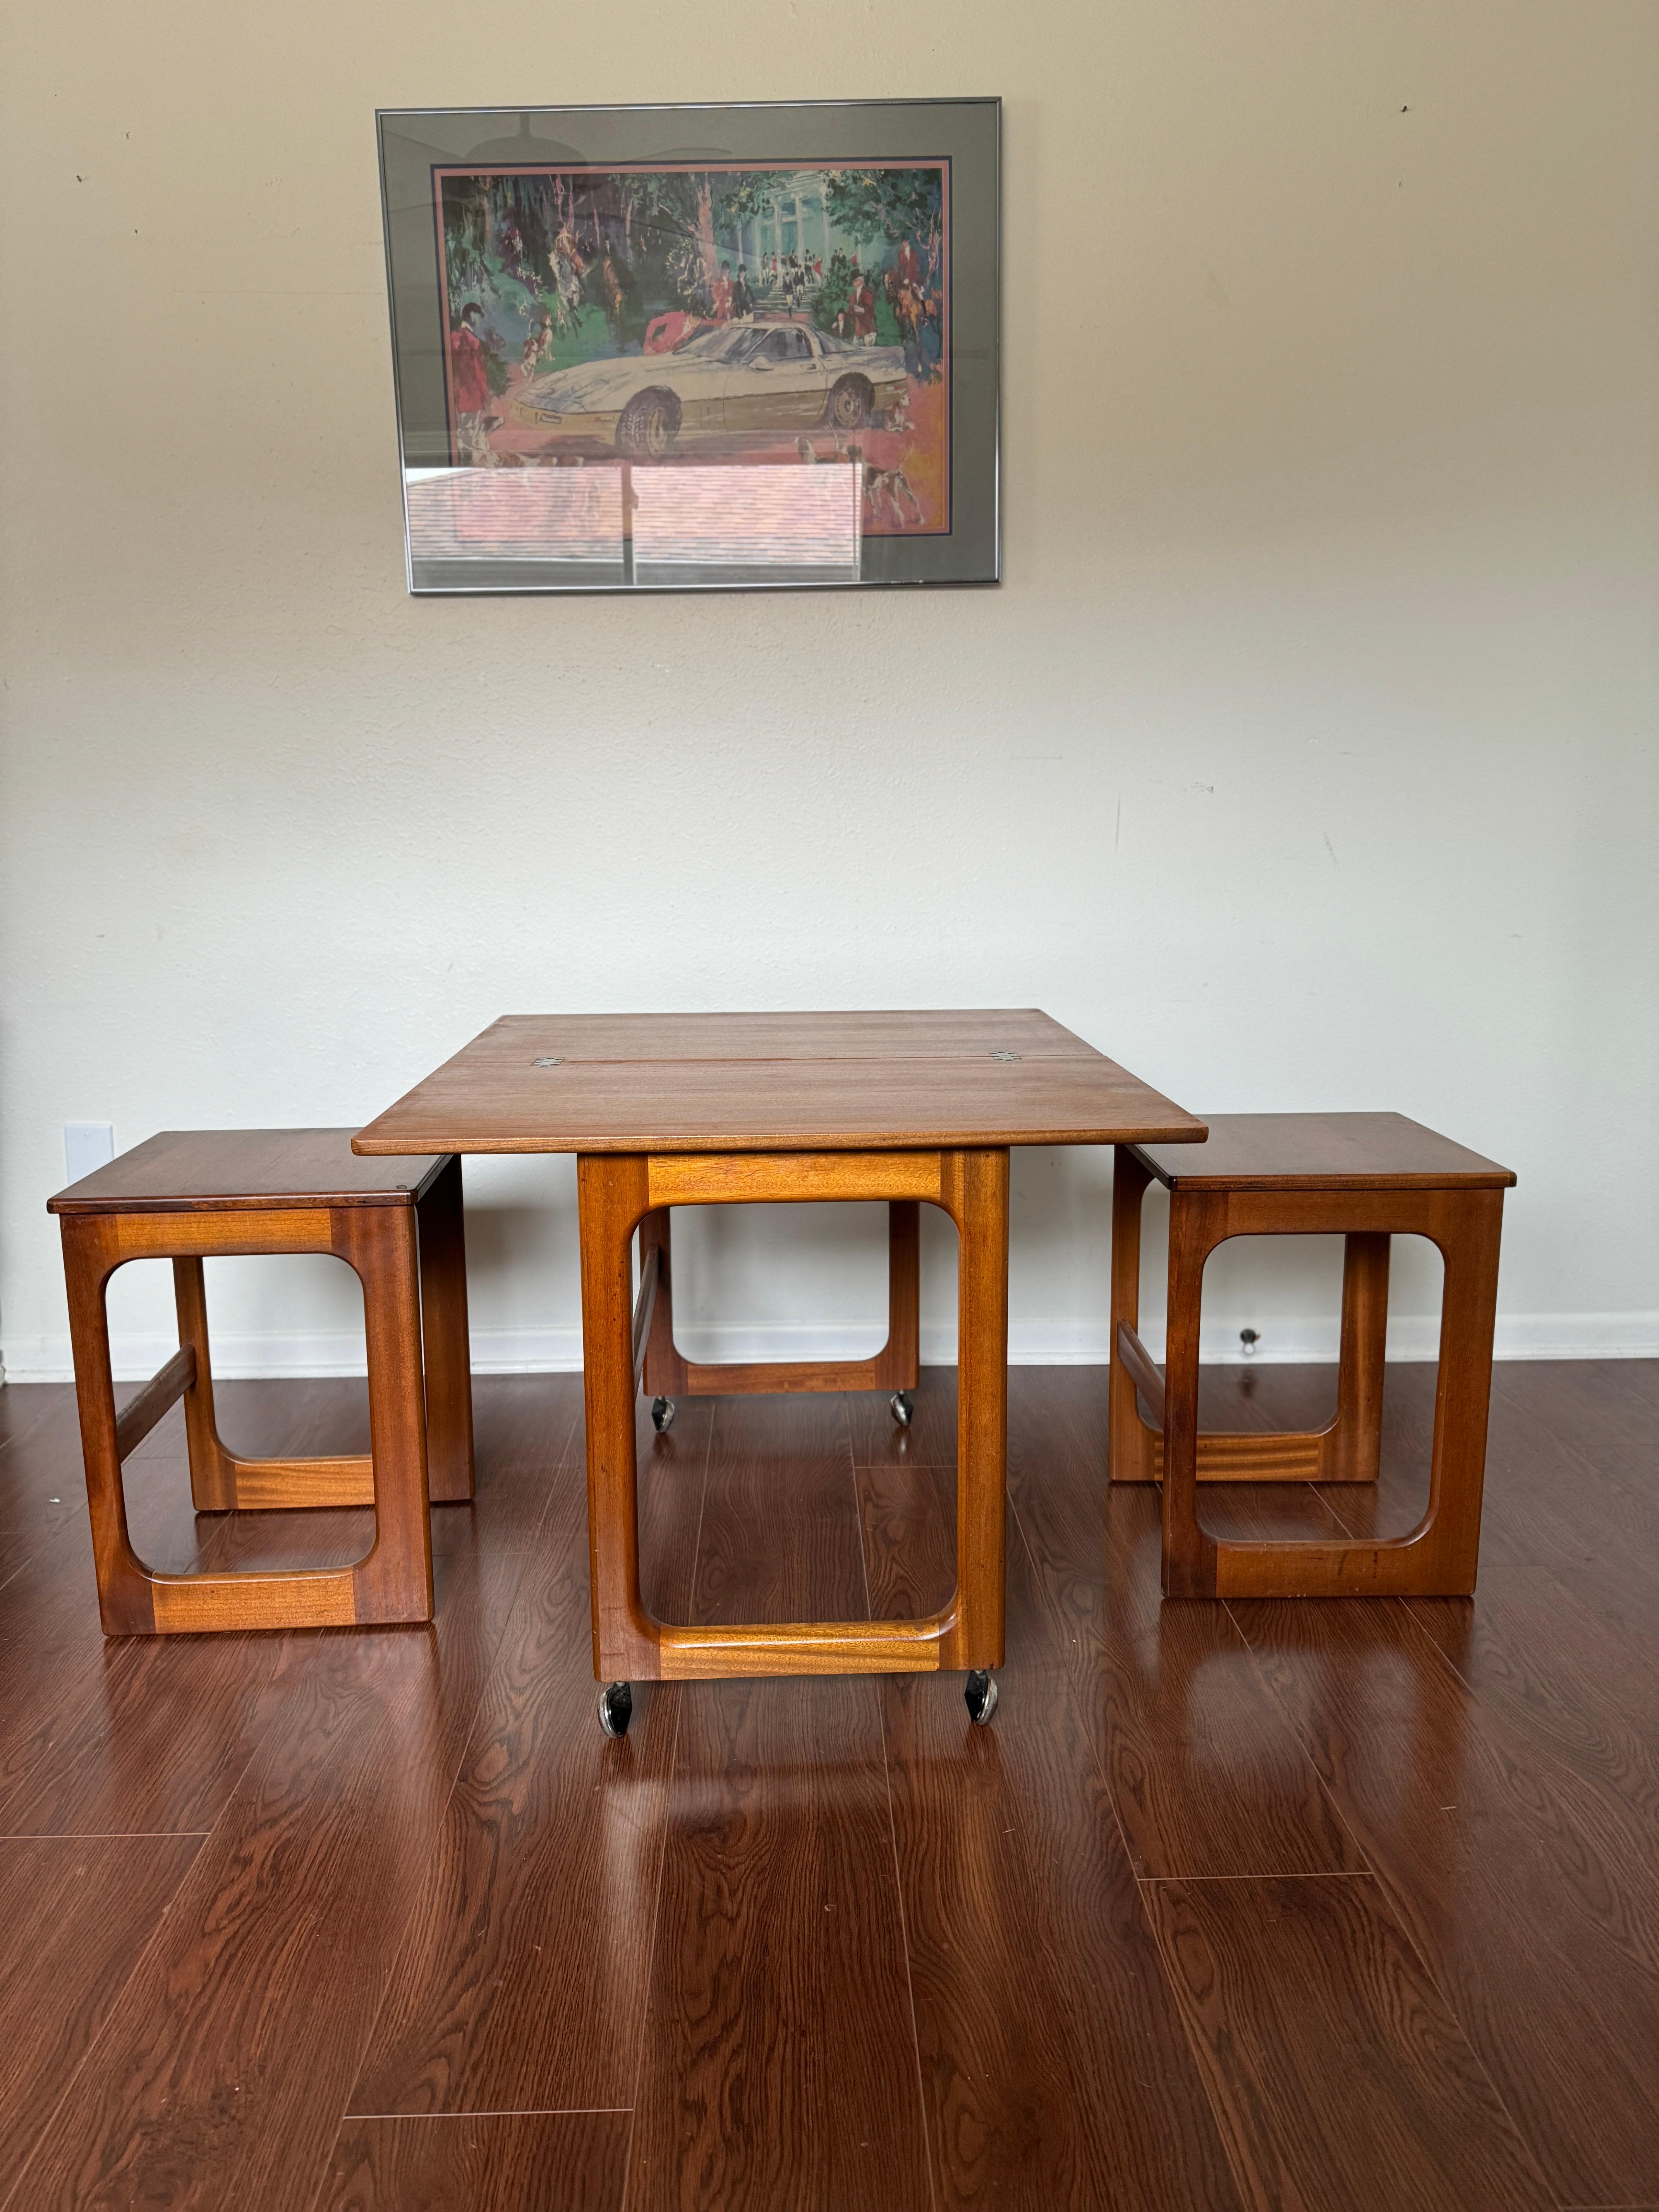 Multifunctional mid century extendable teak table by McIntosh, circa 1960s For Sale 2